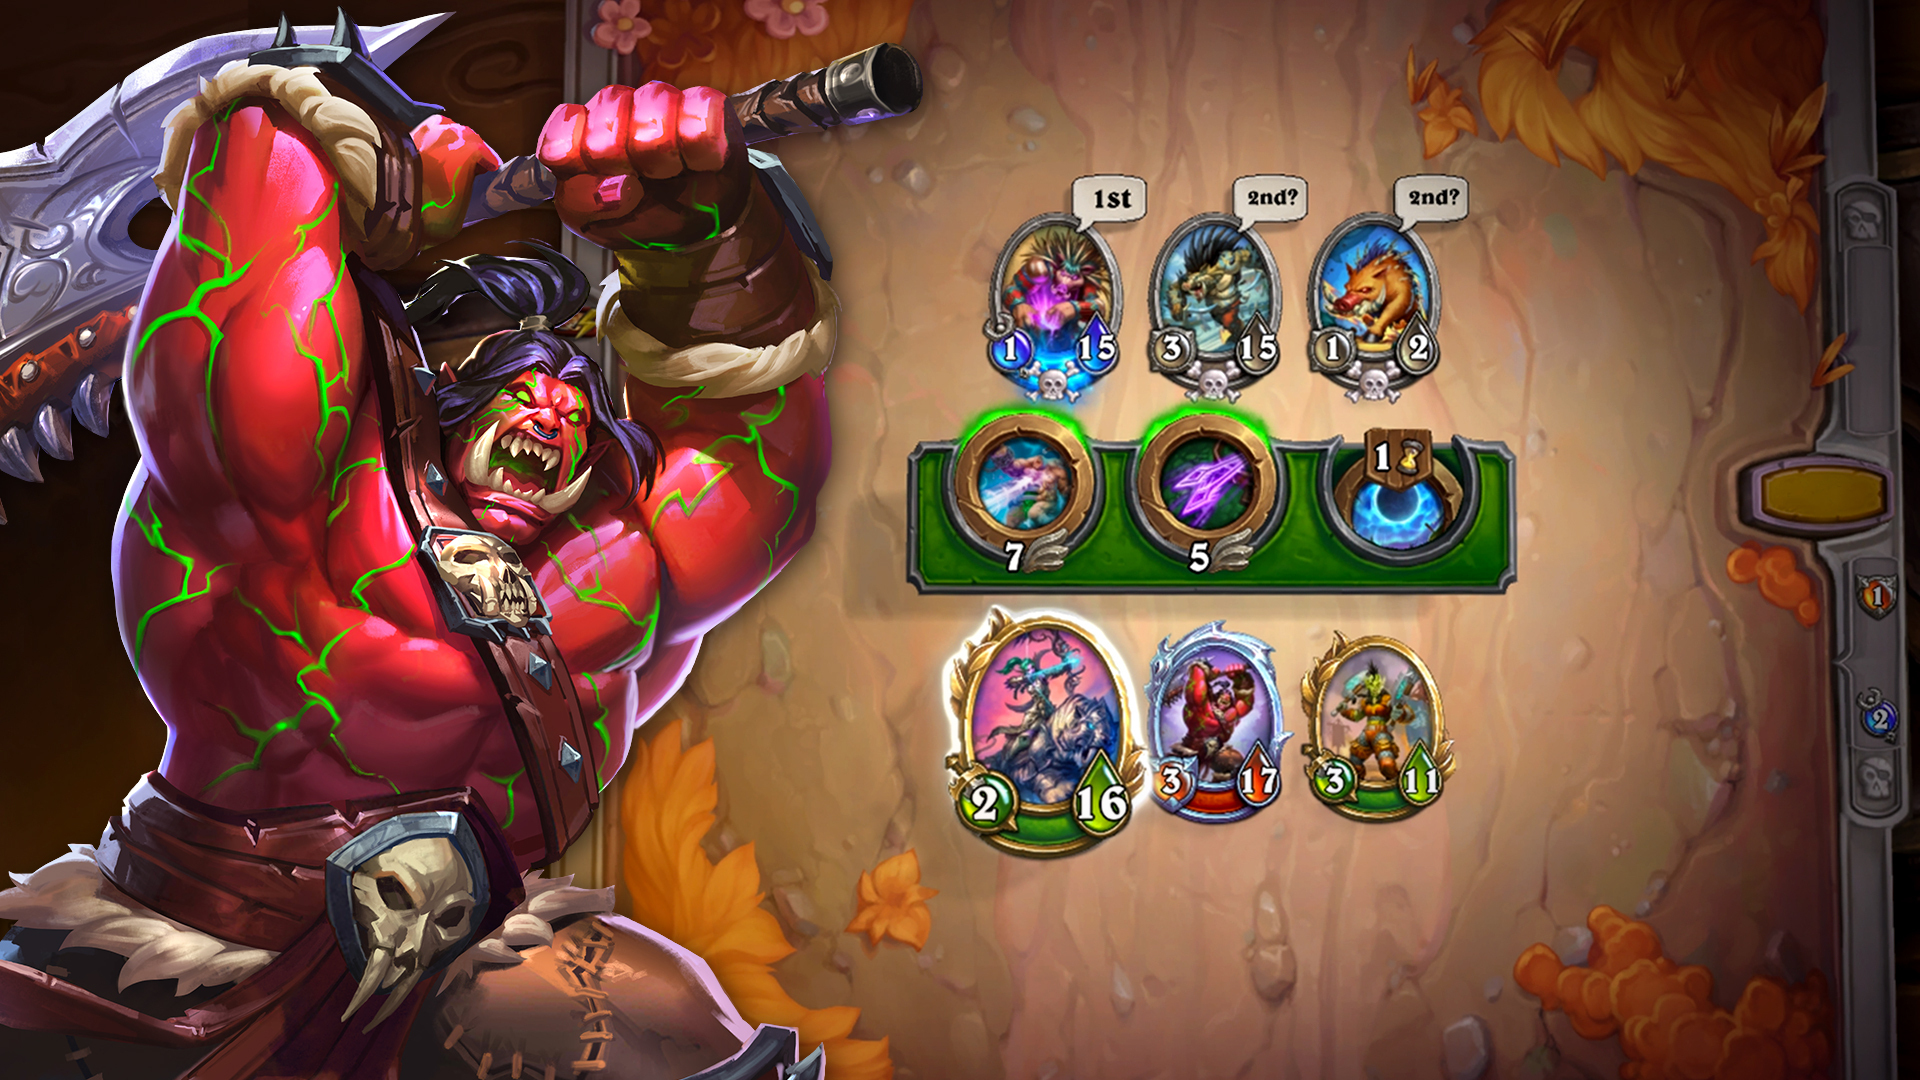 Hearthstone® Mercenaries is Live Today-Experience an All-New Way to Play  the Smash-Hit Digital Card game